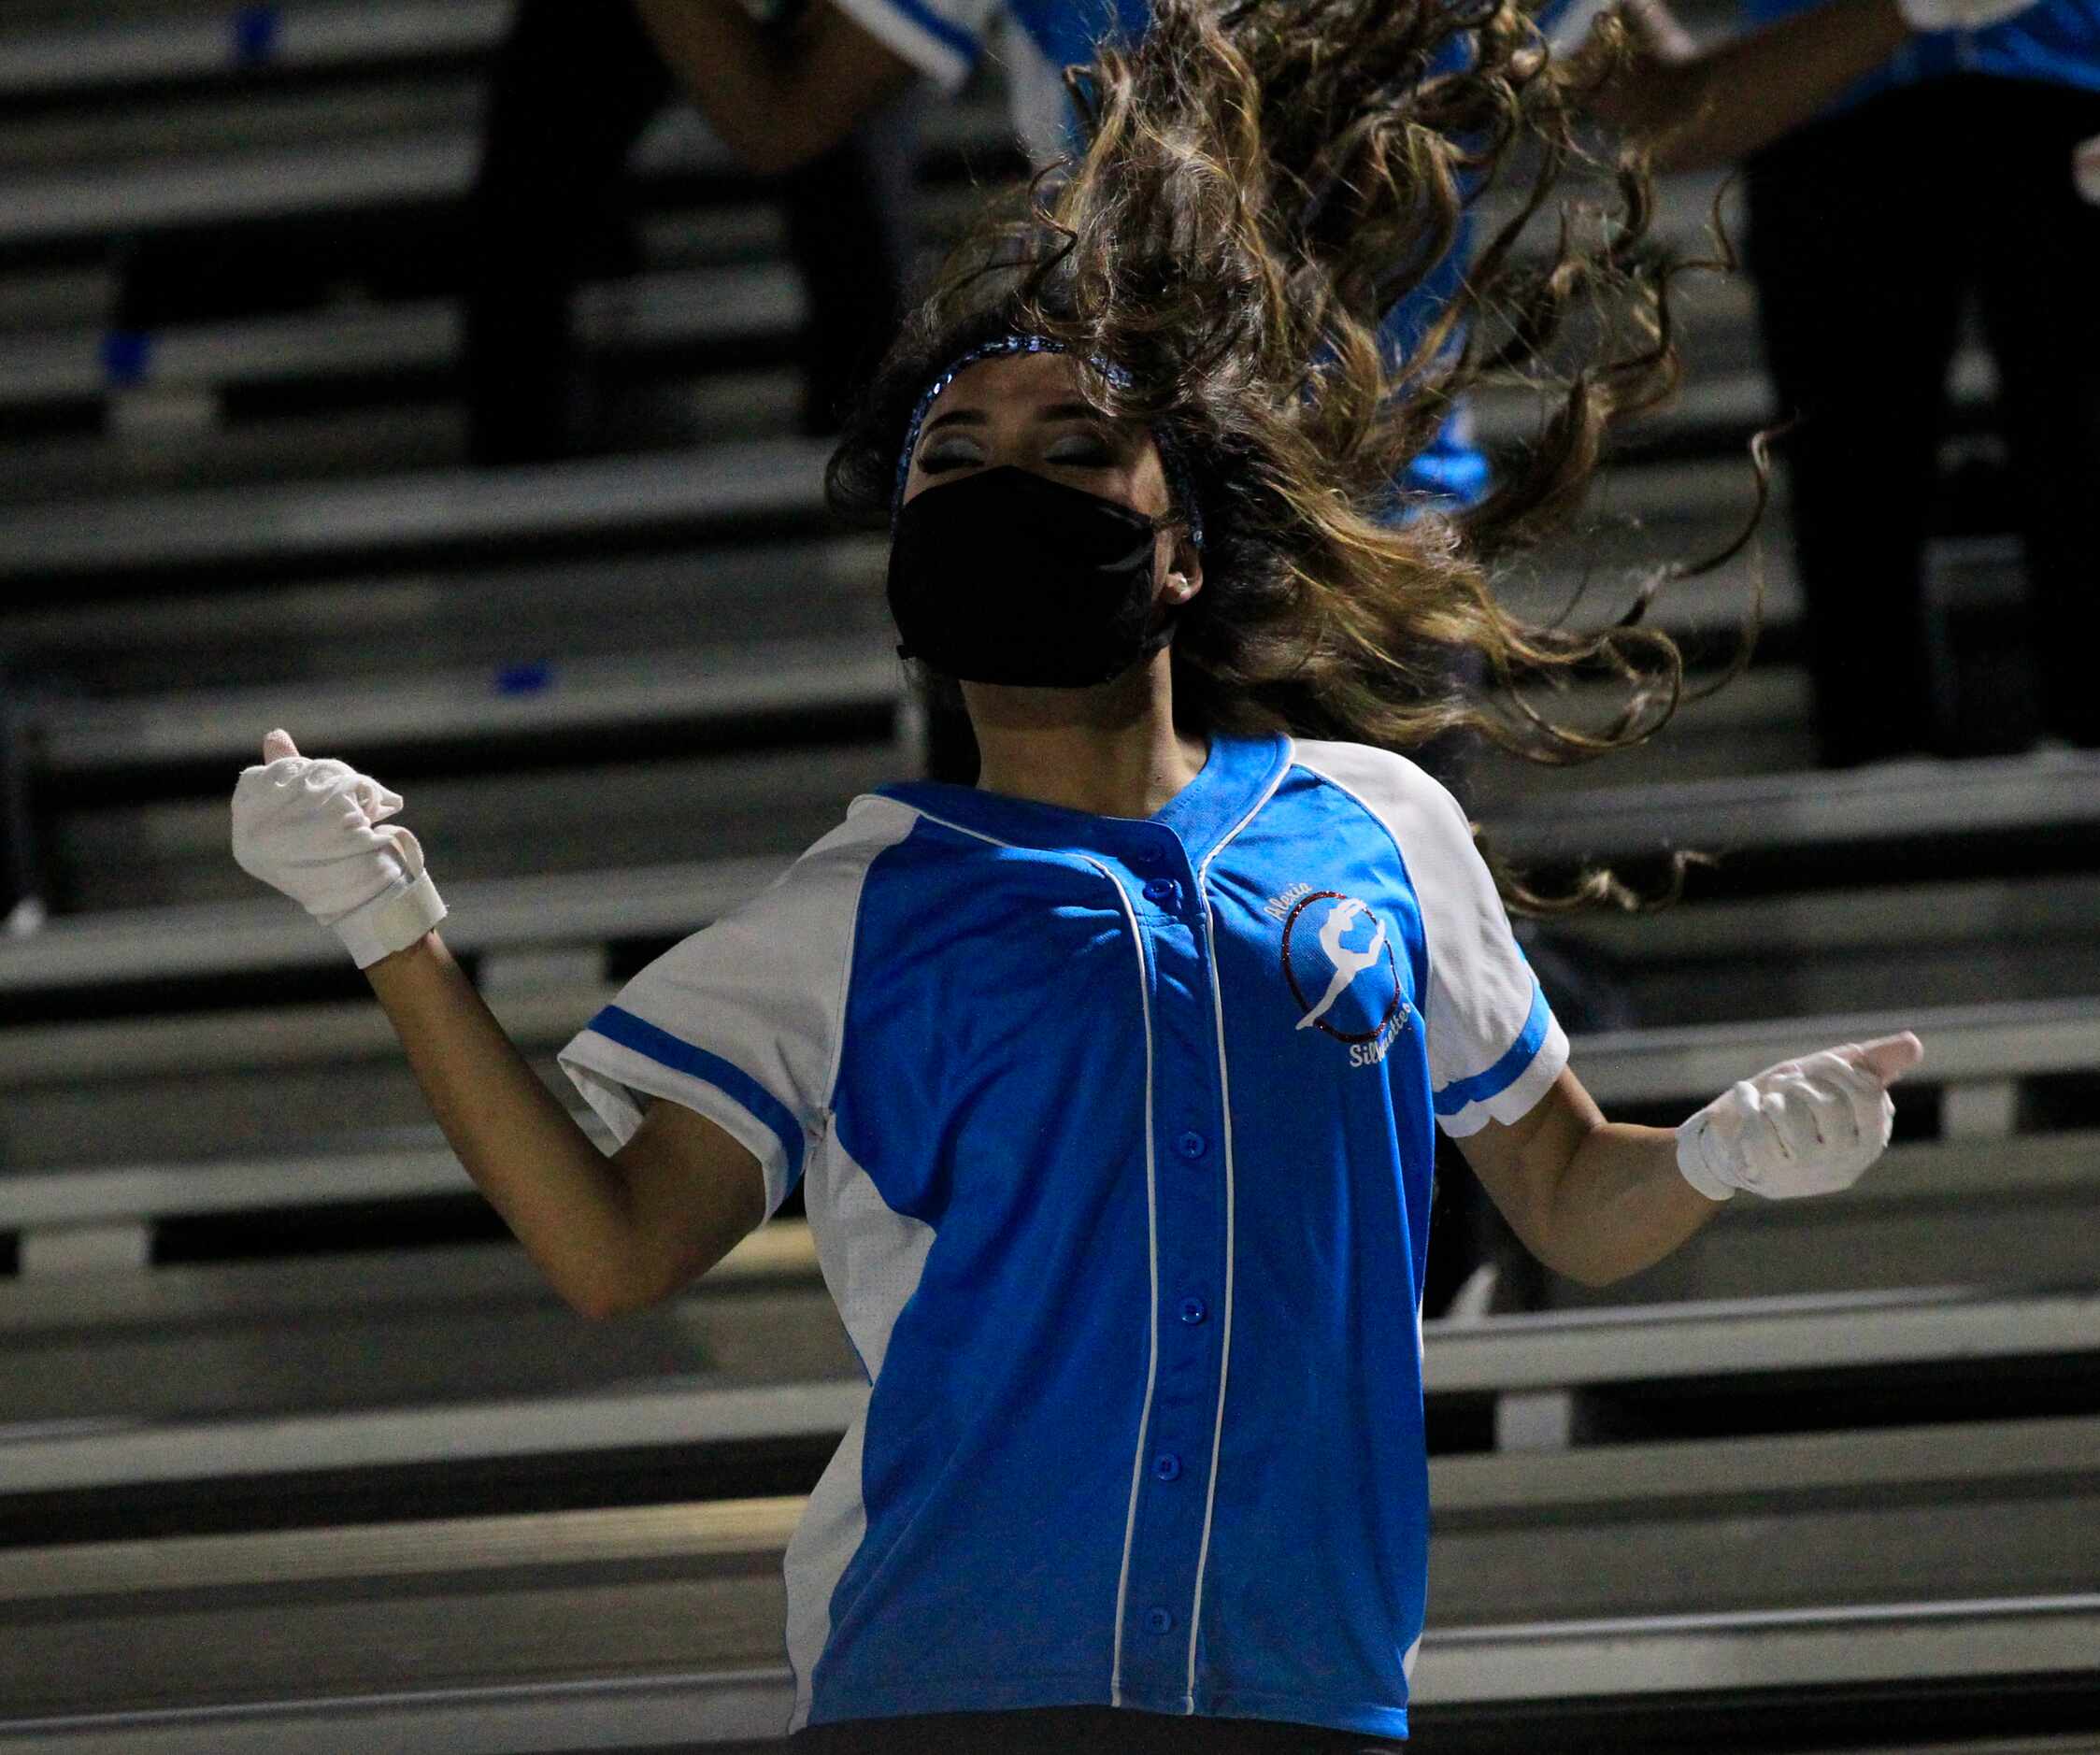 A Skyline dancer's hair flies in the air during a routine in the stands during the first...